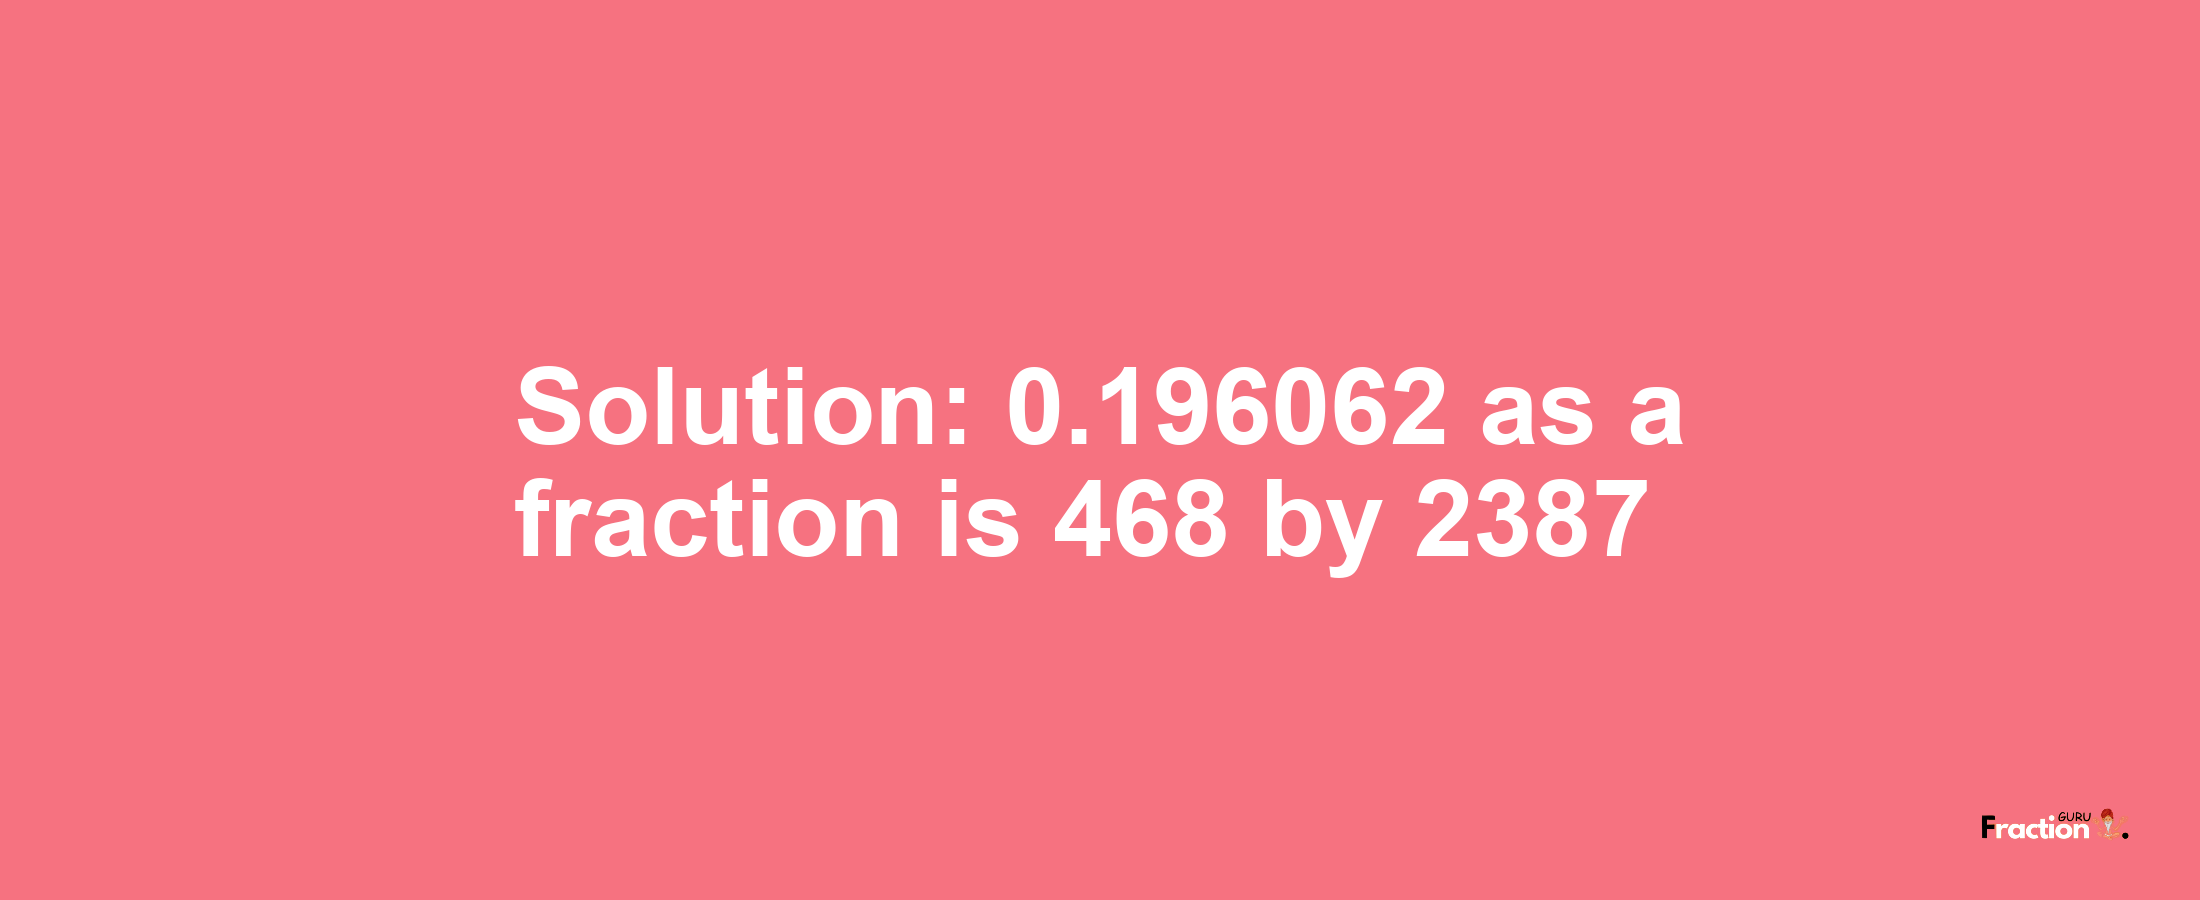 Solution:0.196062 as a fraction is 468/2387